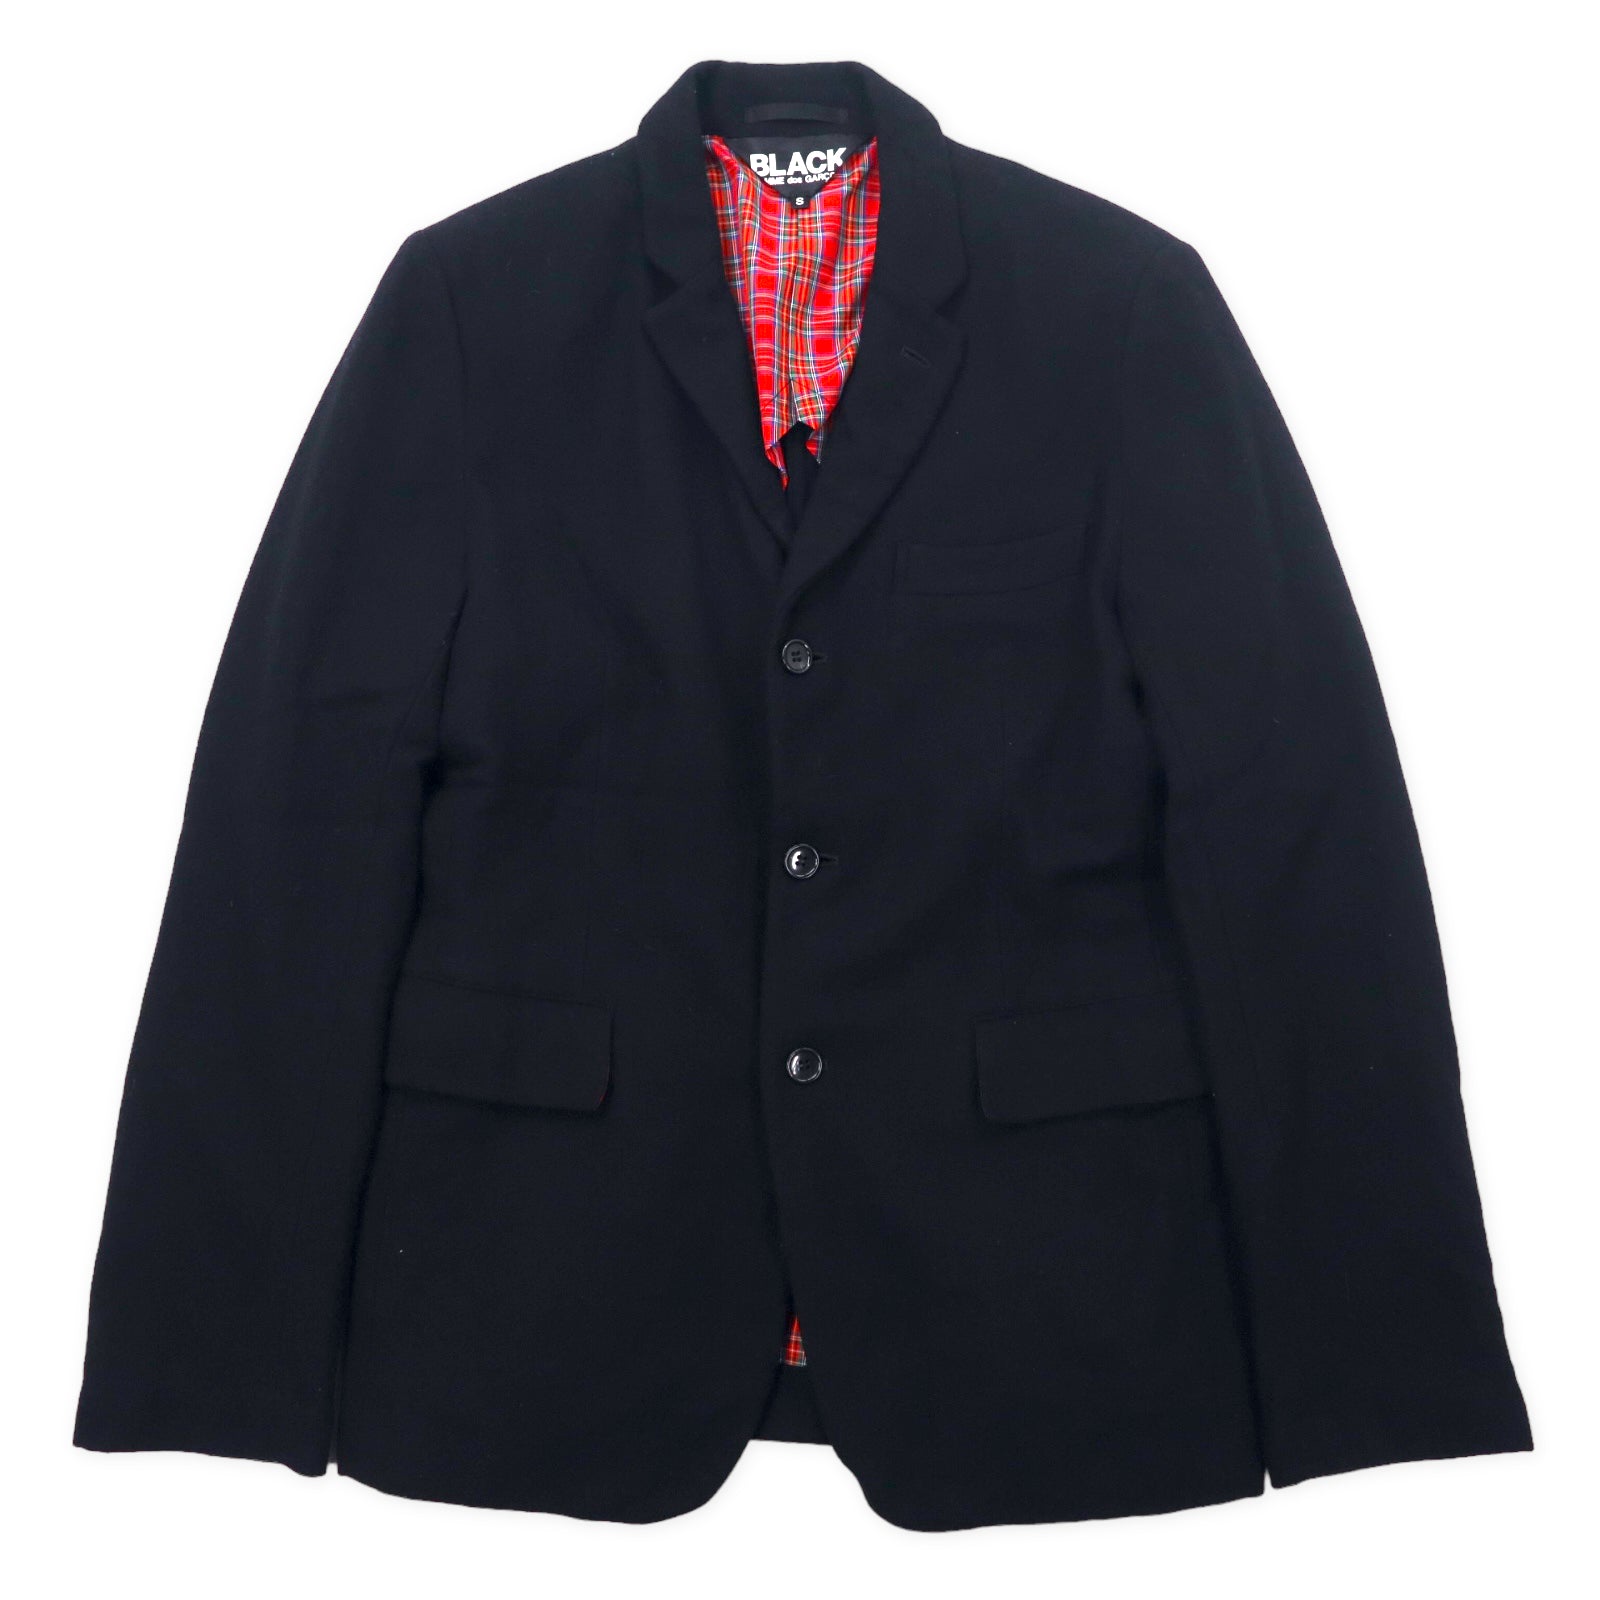 BLACK COMME des GARCONS 3B Tailored Jacket S Black Wool Lining 